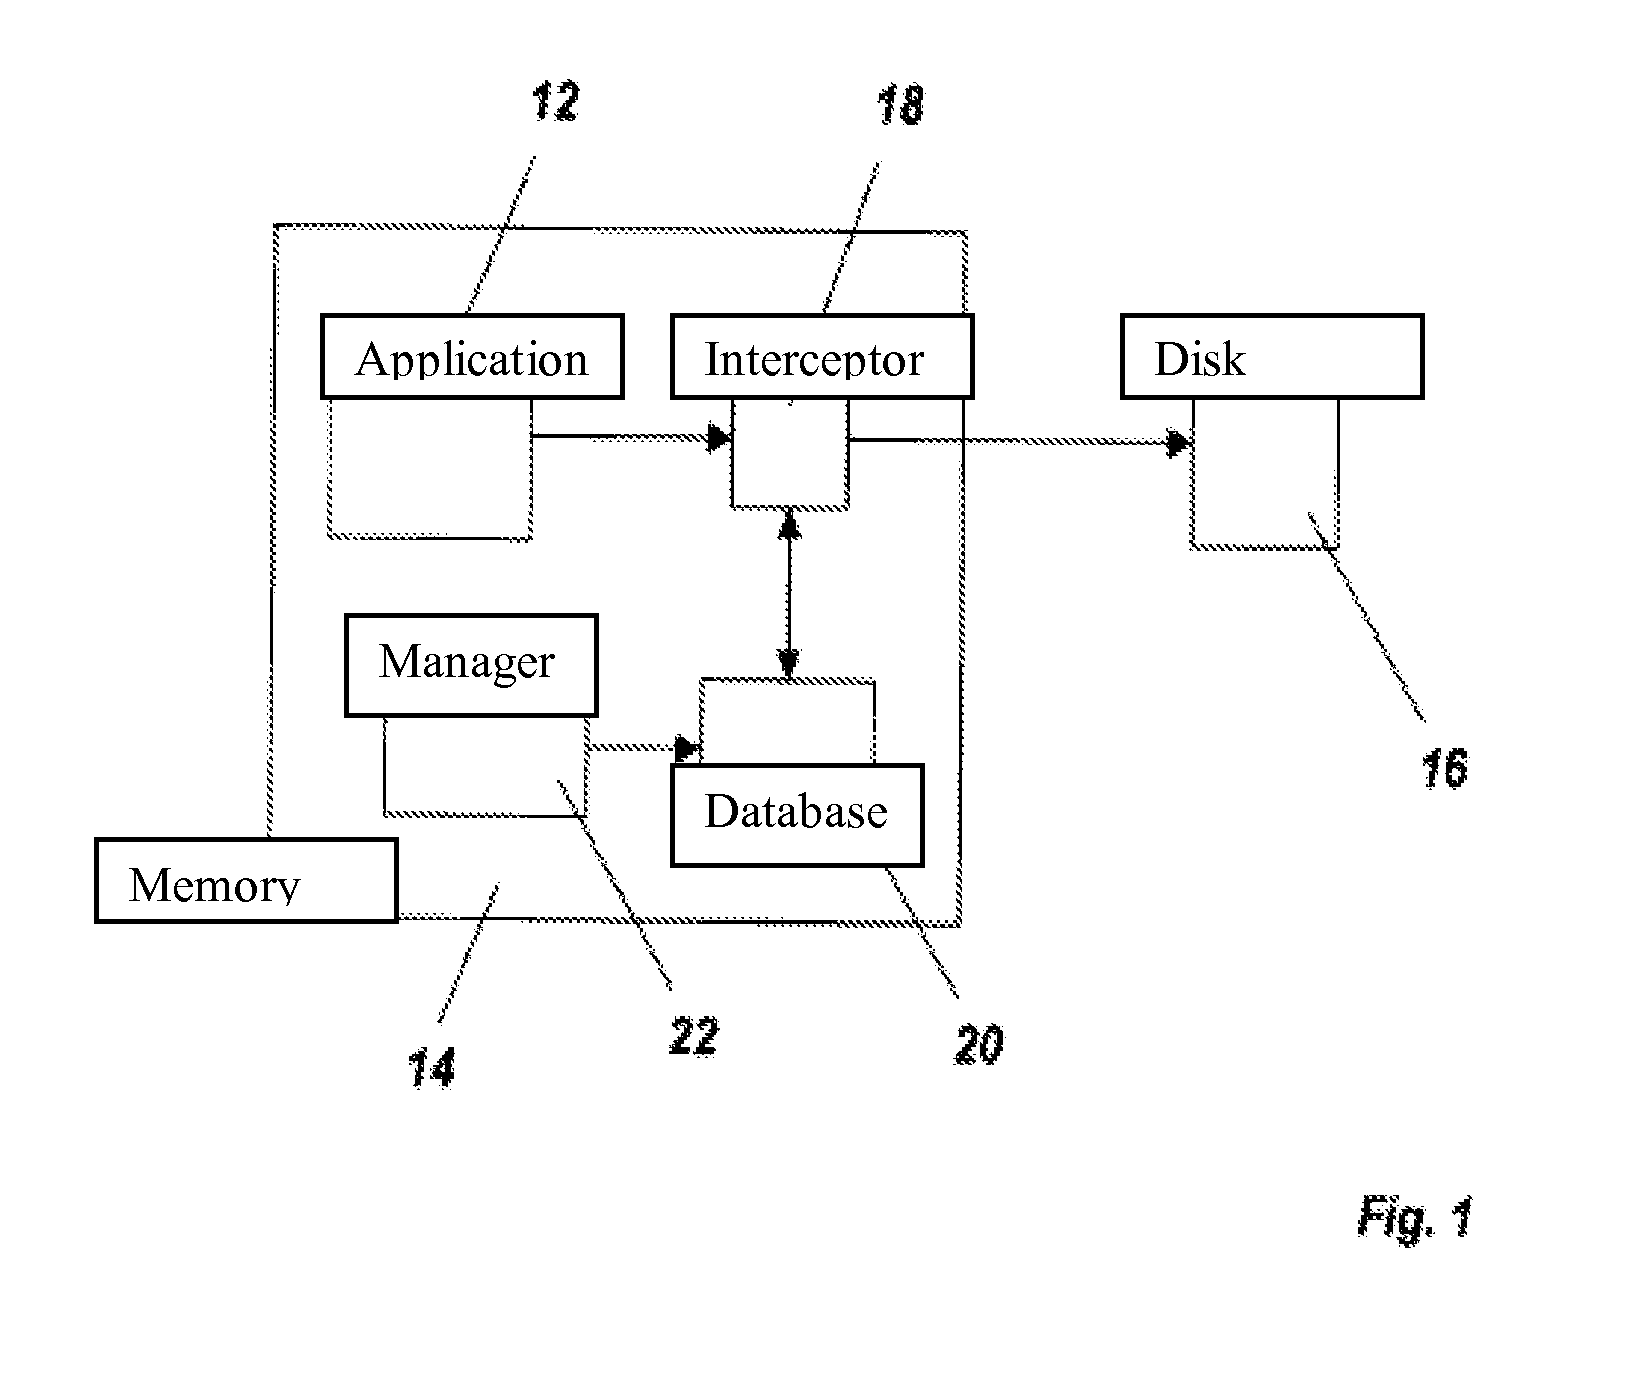 System and method to secure a computer system by selective control of write access to a data storage medium